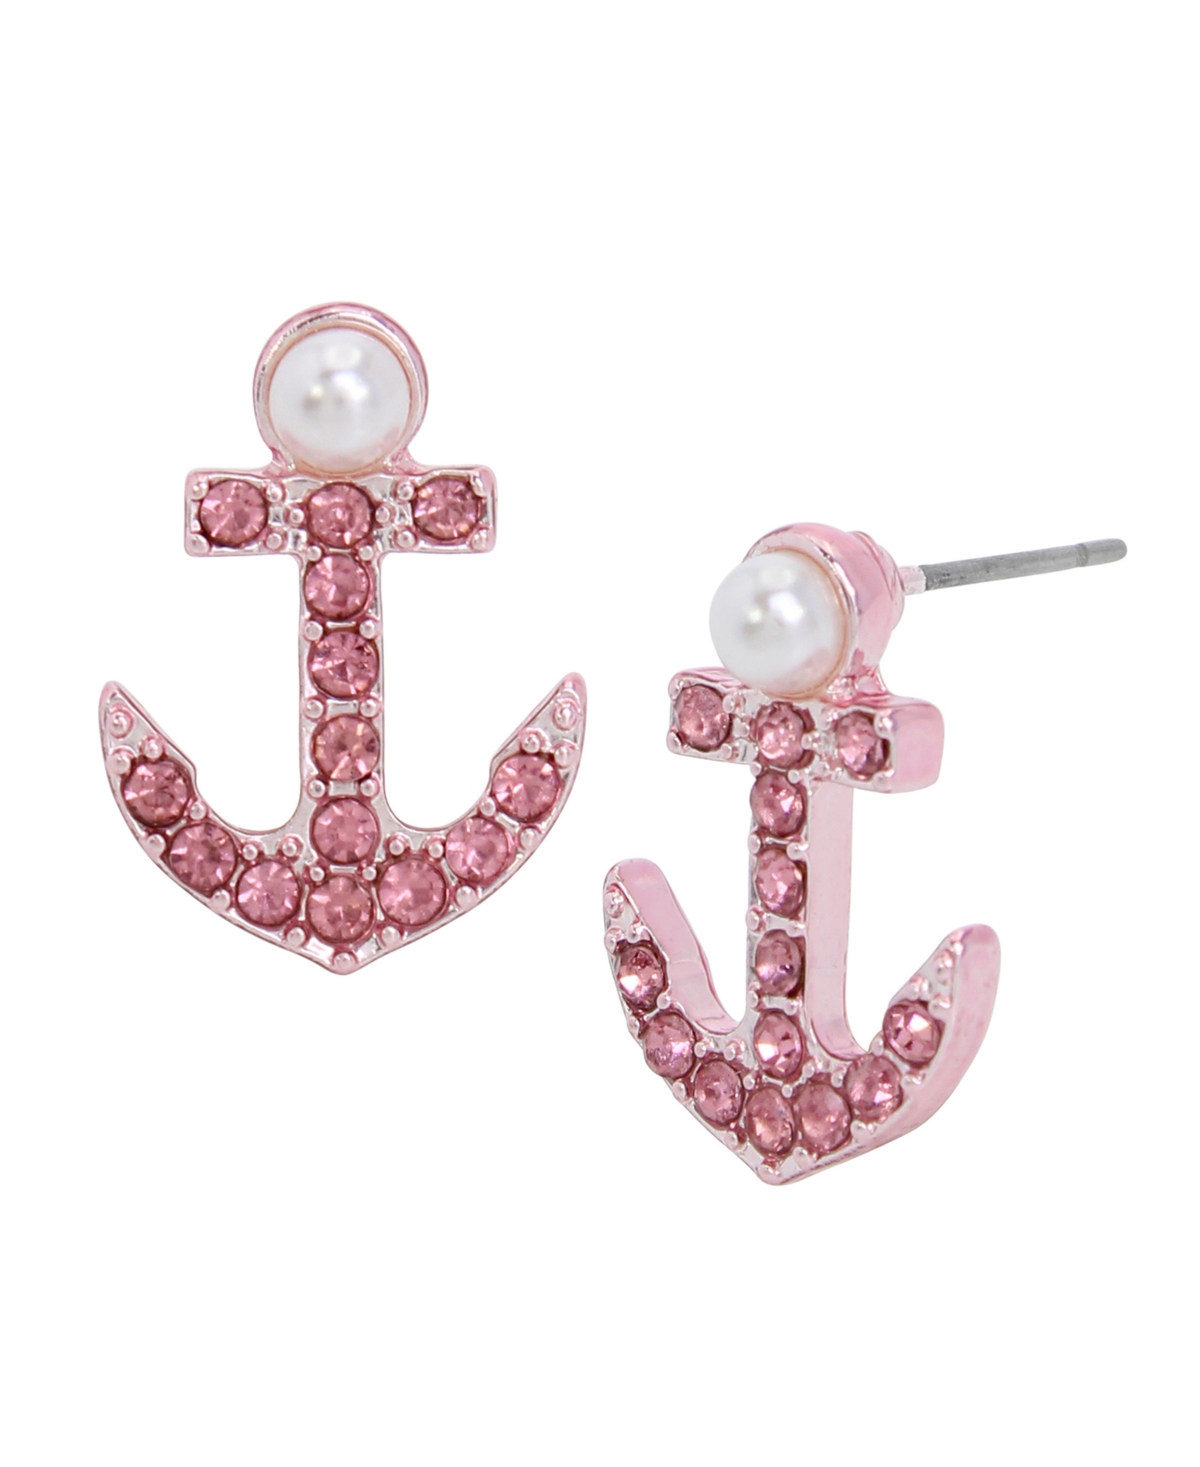 Faux Stone Anchor Stud Earrings - Pink